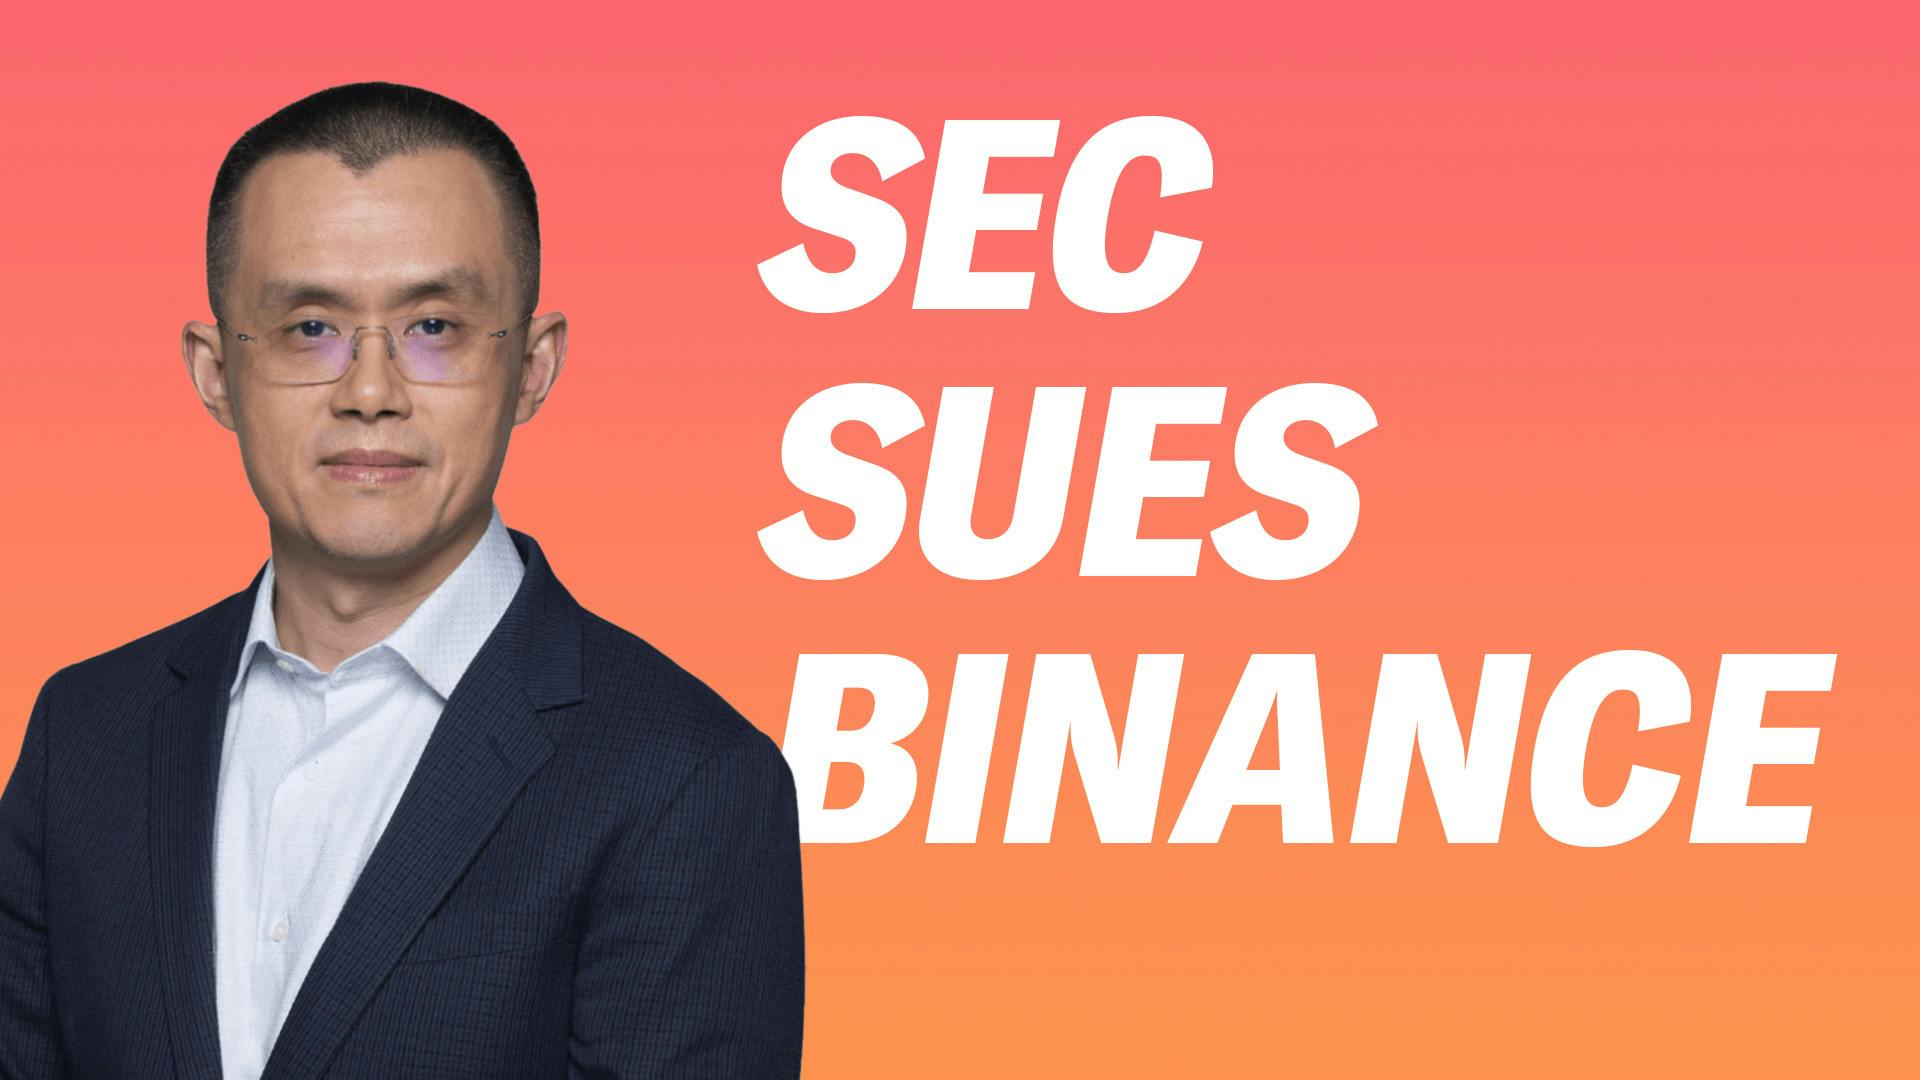 The SEC sues Binance and its CEO CZ over a plethora of alleged securities violations.